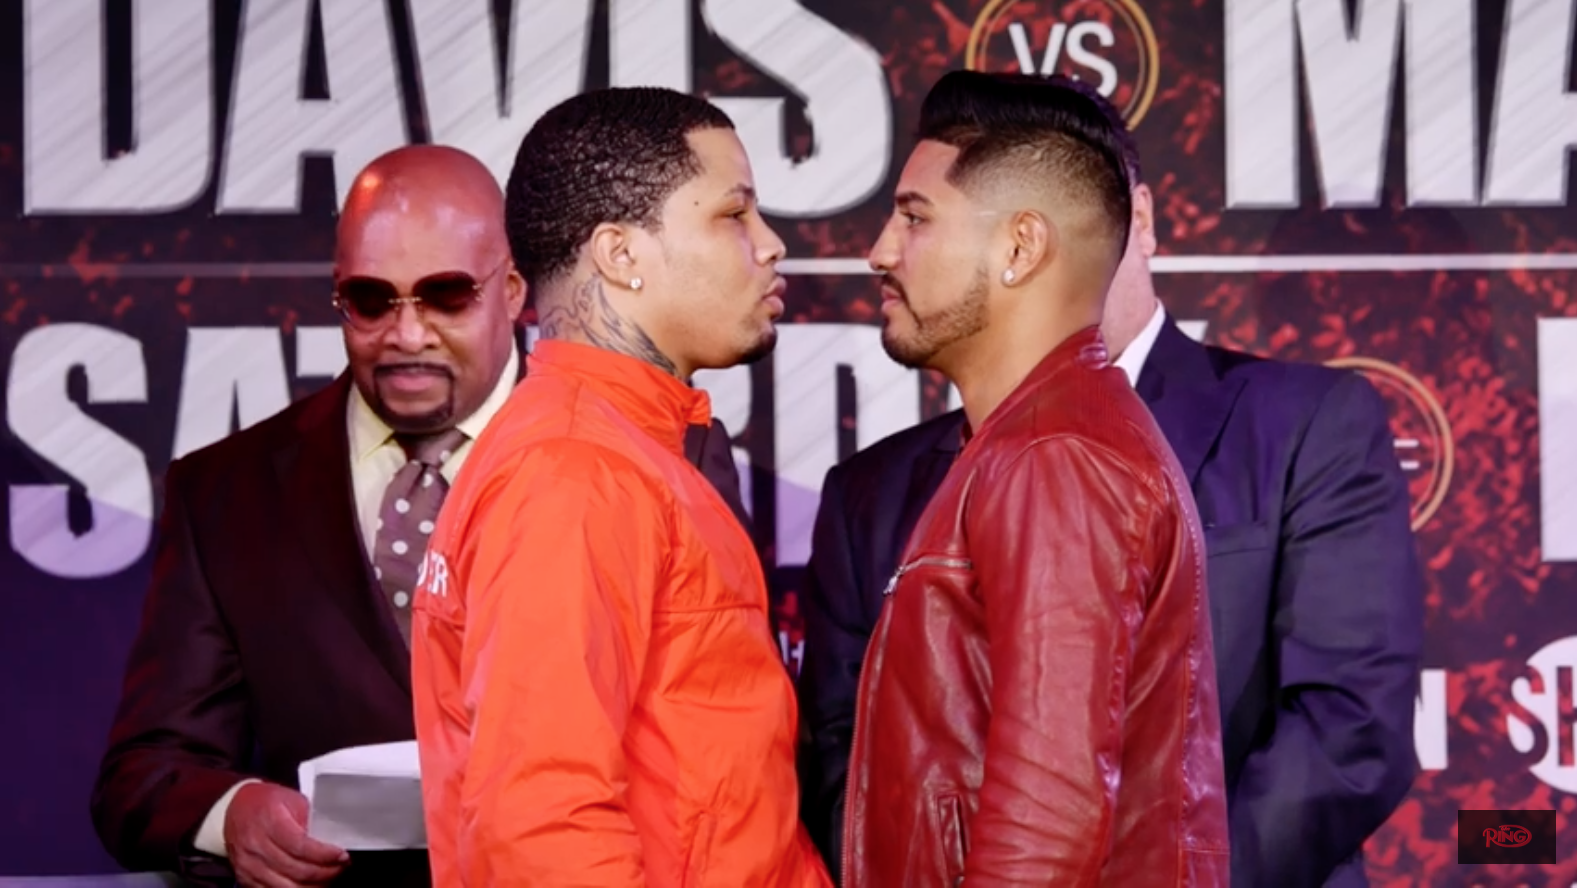 WATCH: Gervonta Davis, Abner Mares meet face-to-face at LA press conference - The Ring